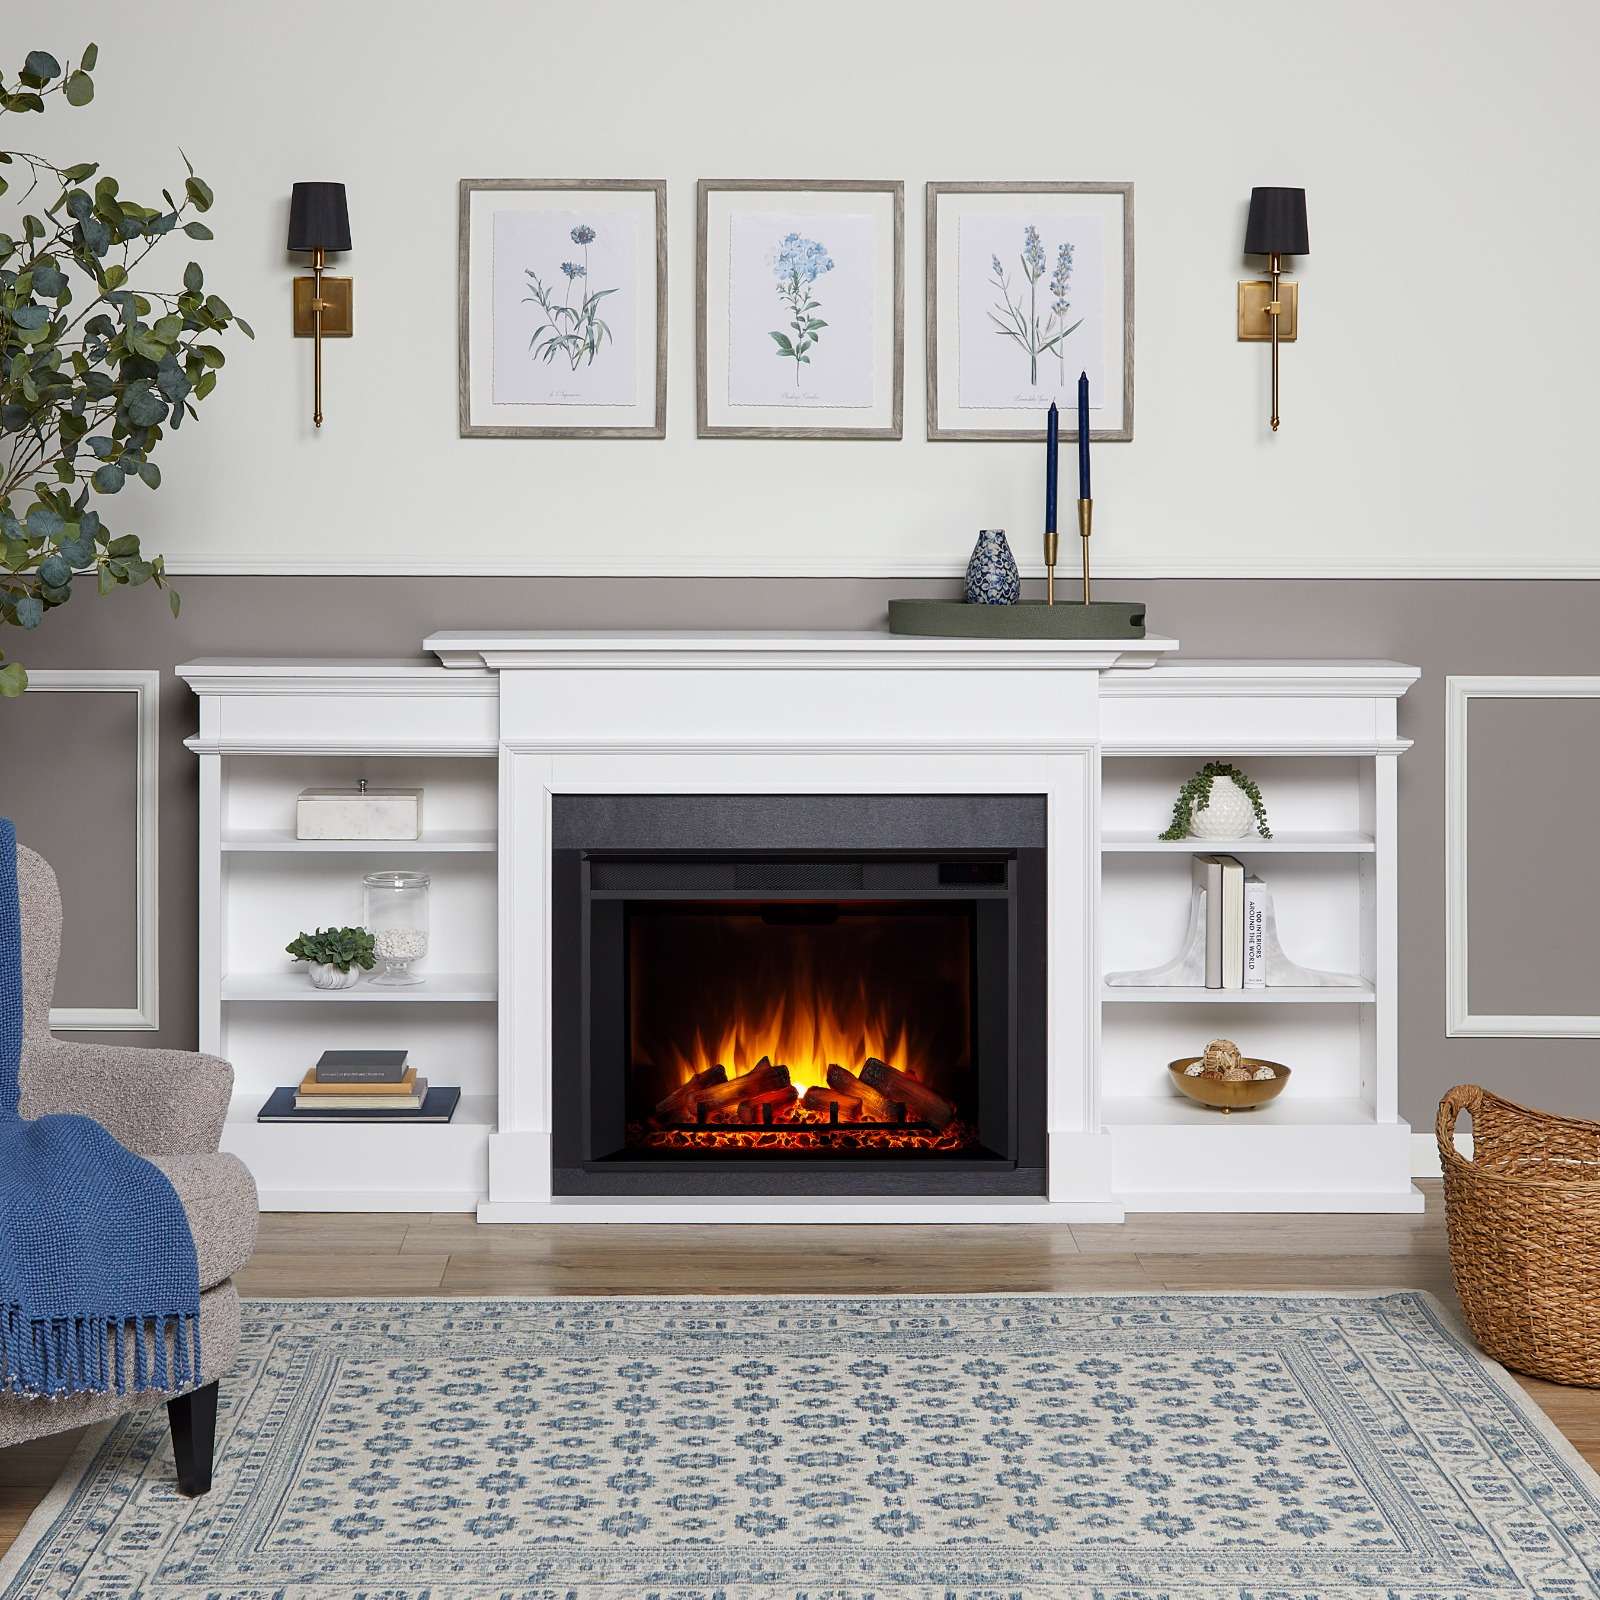 1 Propane Fireplace Store: 100s of Propane Gas Fireplaces